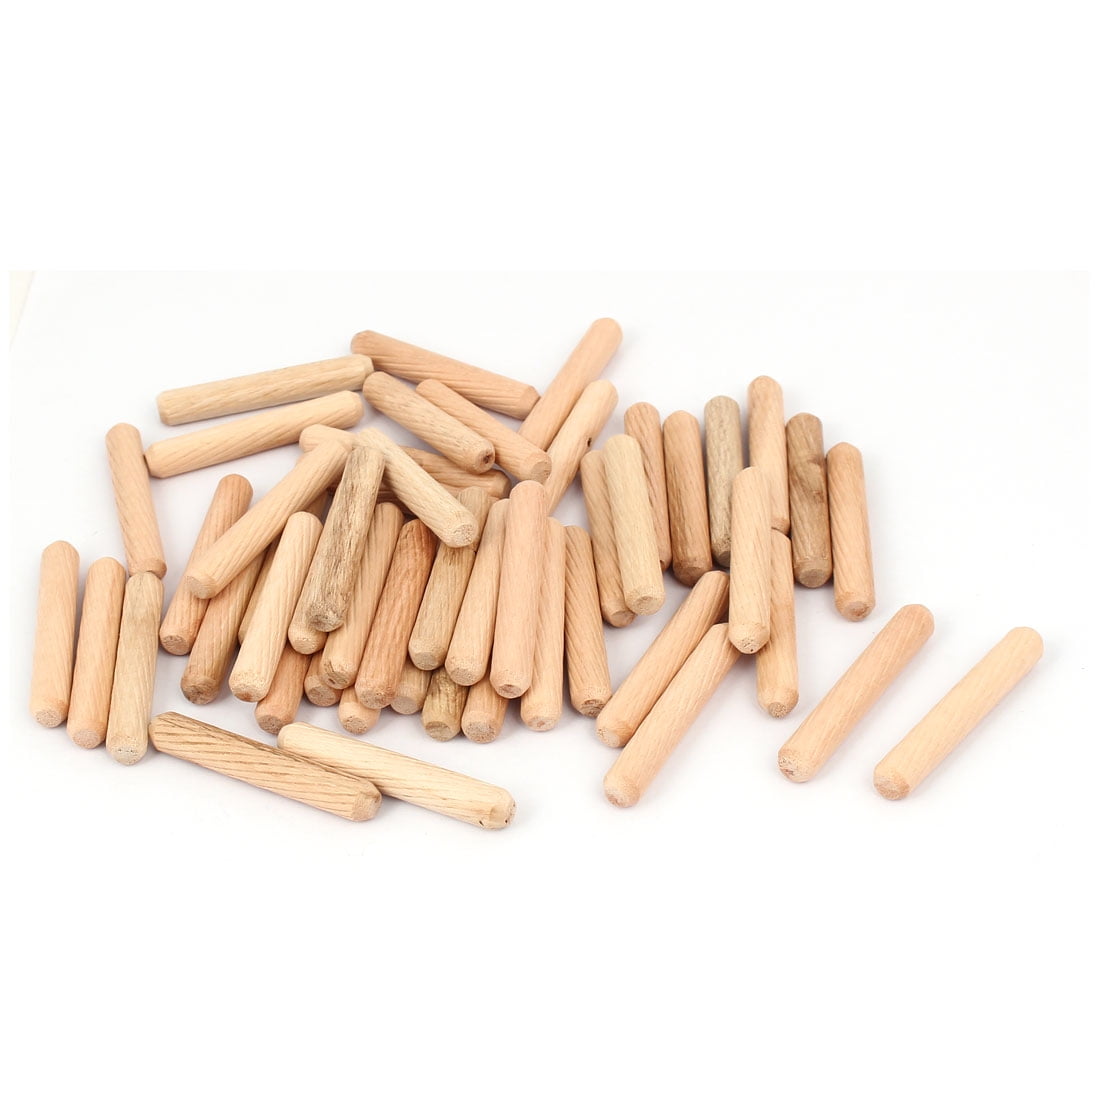 Wooden Dowel Pins 2 x 7/16 inch, Pack of 500 Fluted Dowel Joints for  Woodworking, Furniture and Crafts, by Woodpeckers 